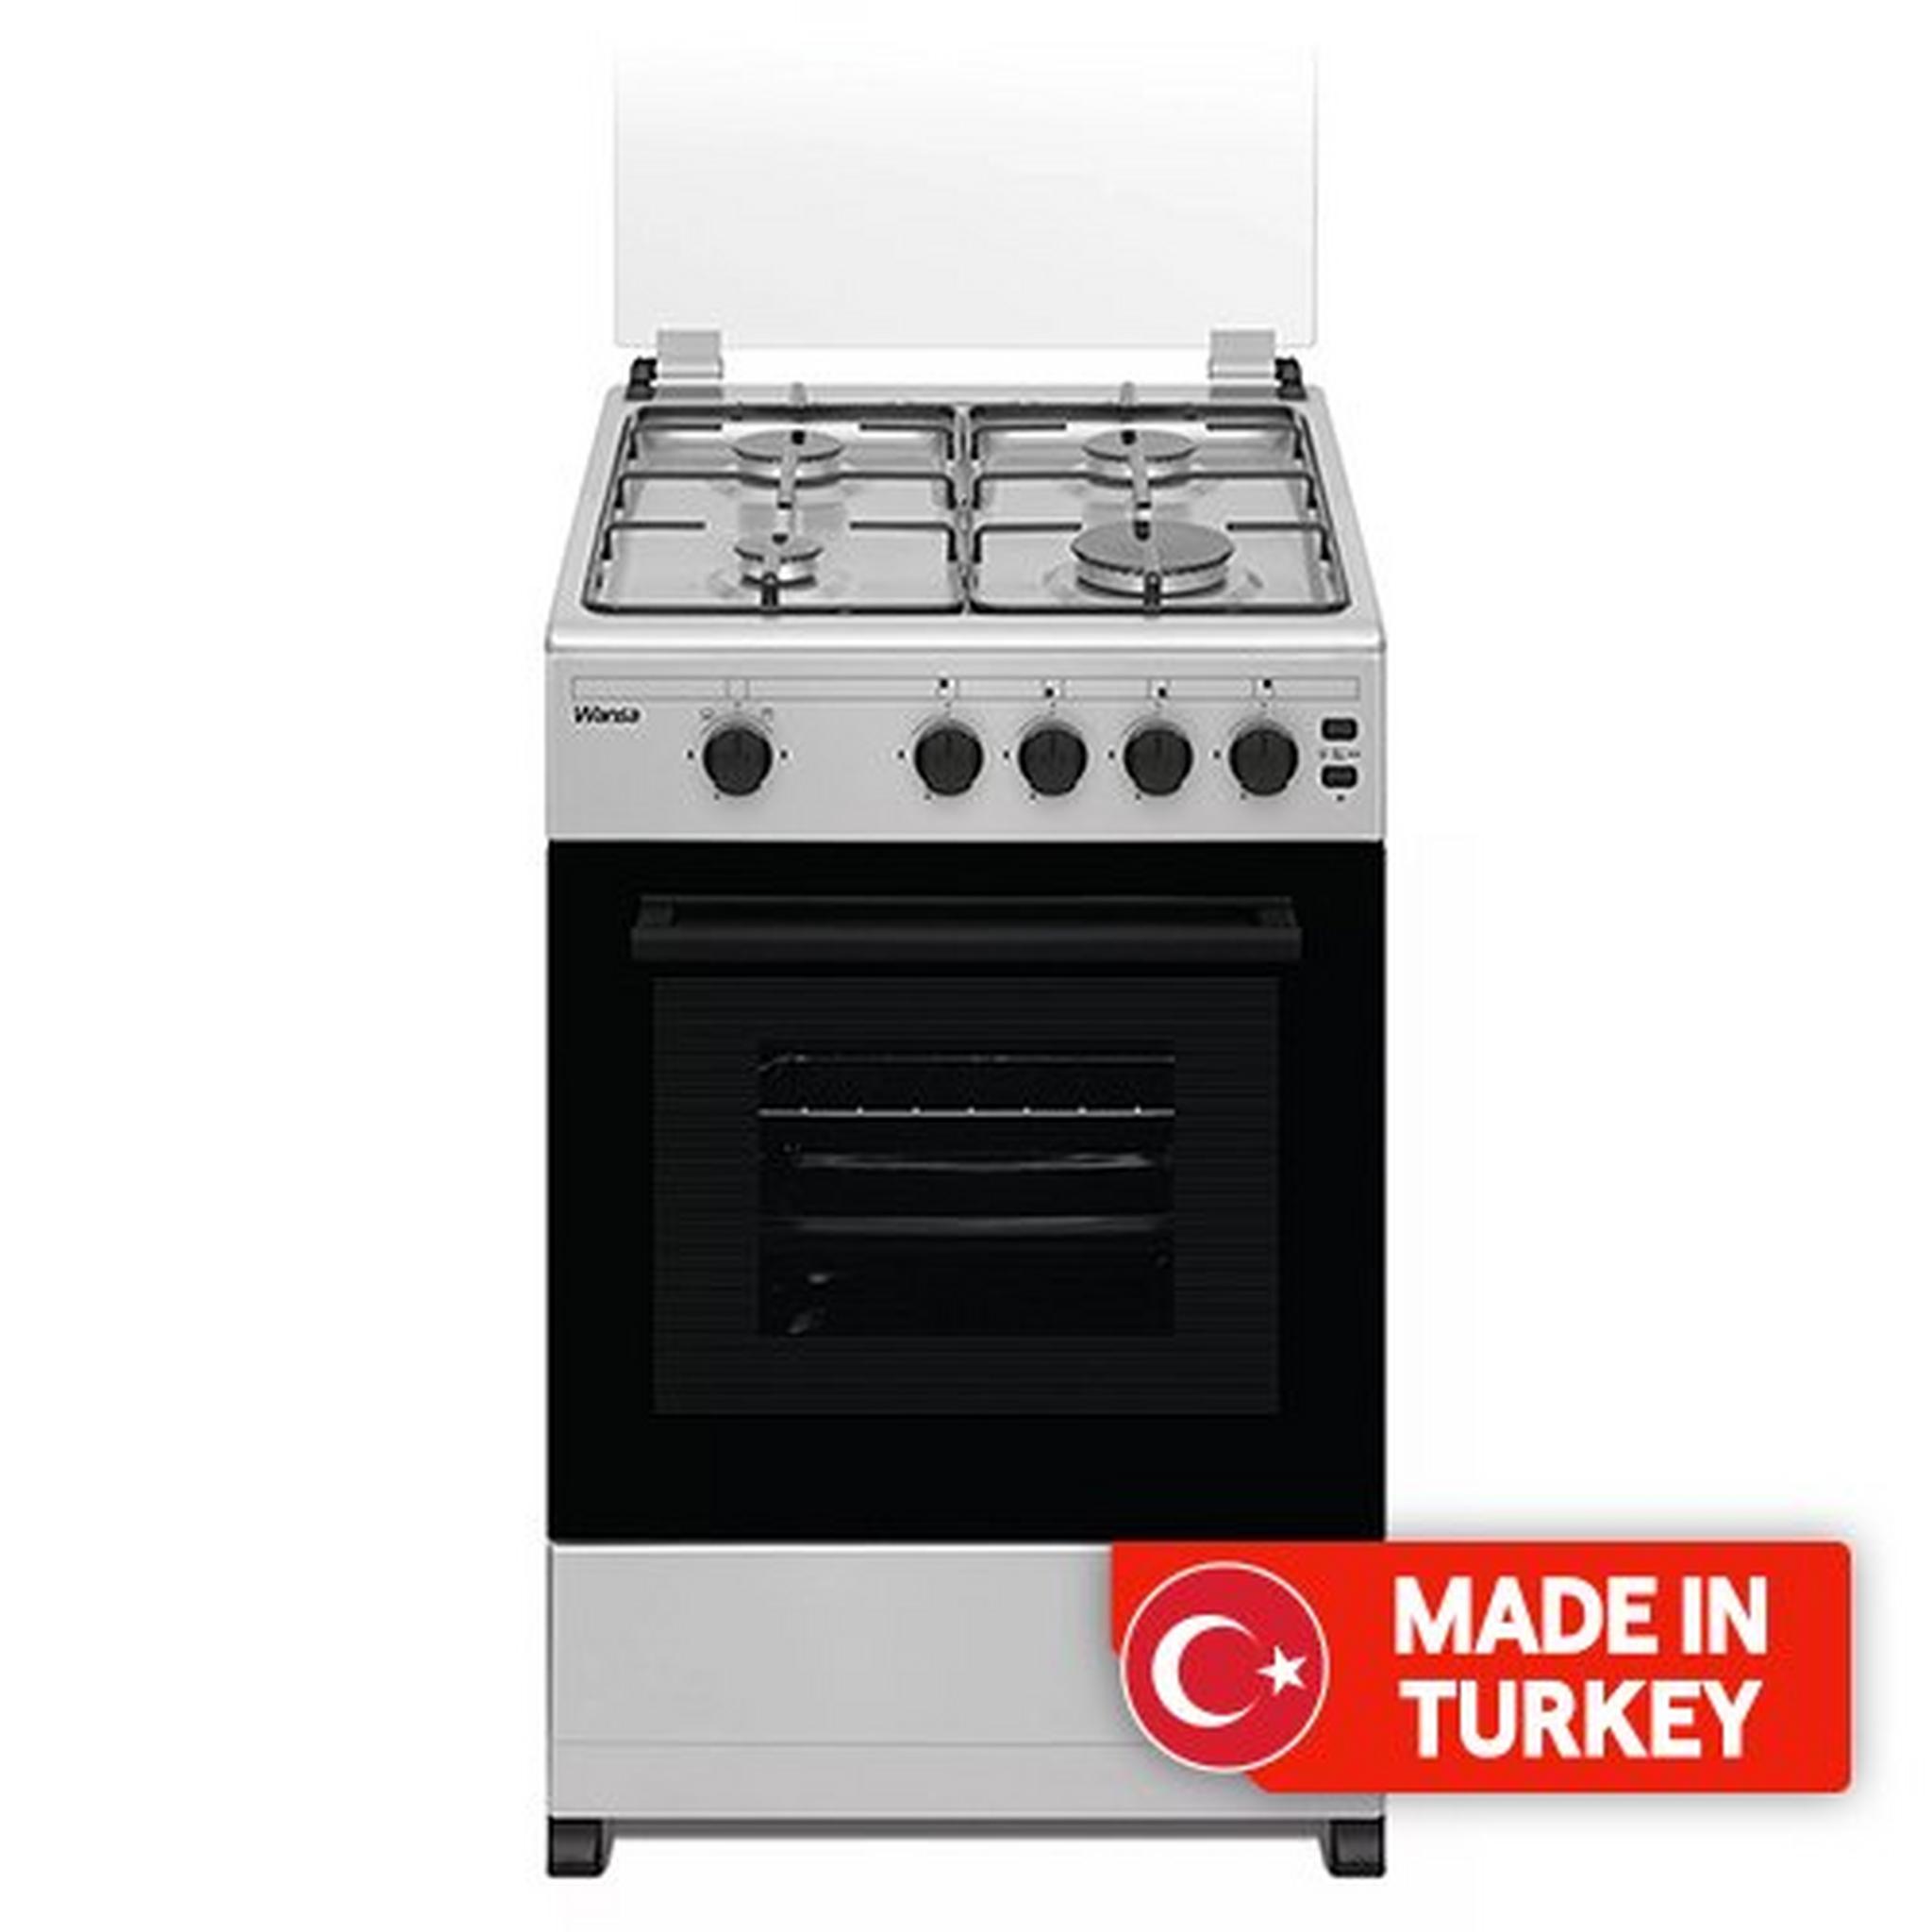 Wansa 50X50cm 4 Burner Gas Cooker, WCT4401XS - Stainless Steel